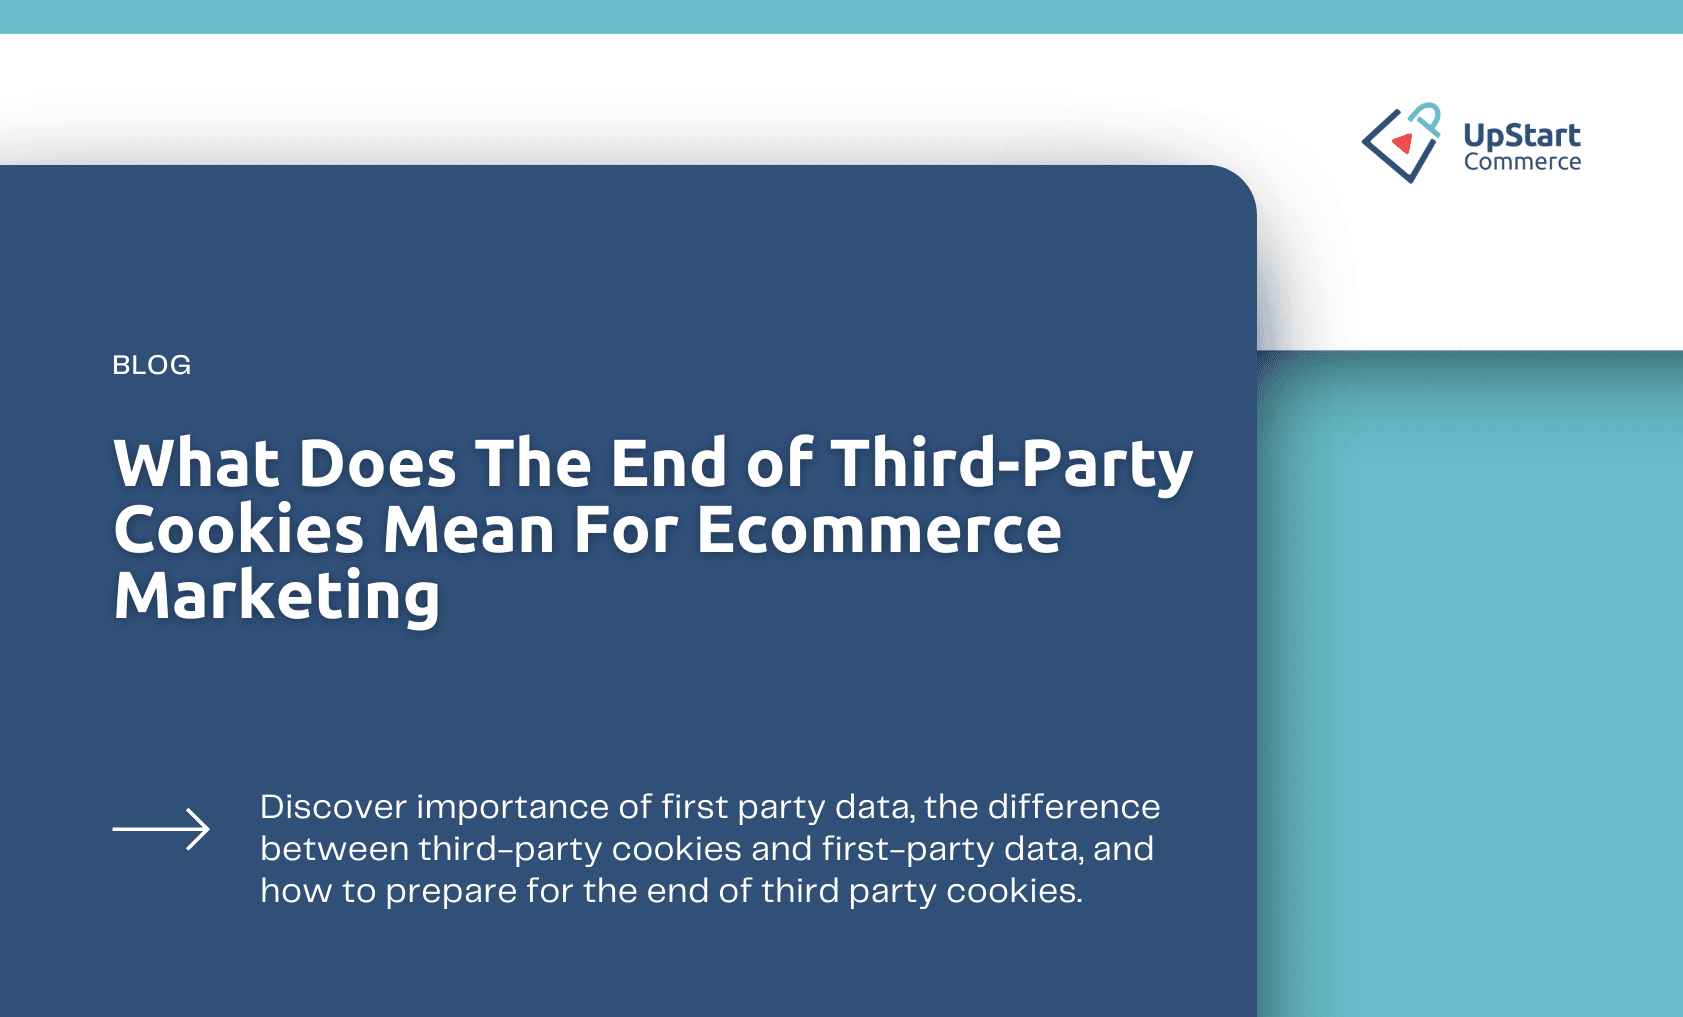 Discover the importance of first party data, the difference between third party cookies and first party data, and how to prepare for the end of third party cookies.